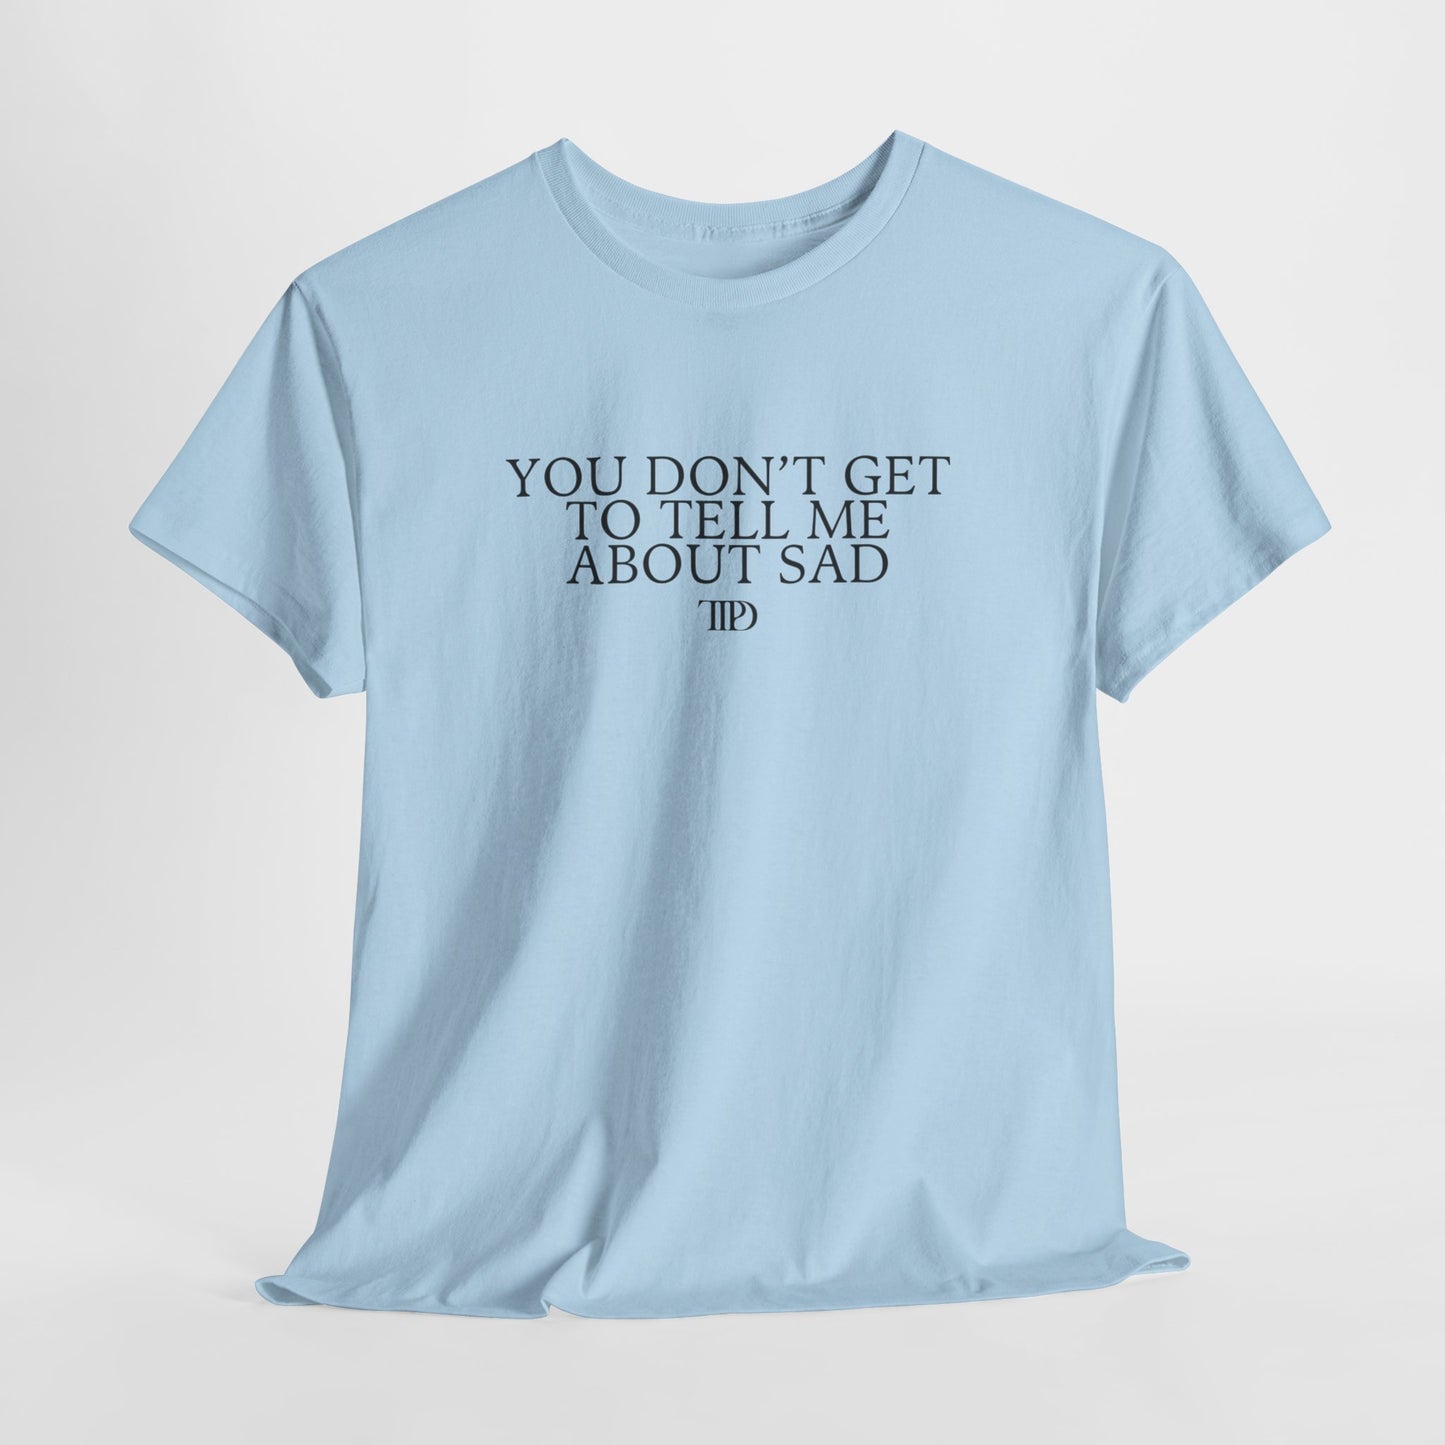 You Don't Get To Tell Me About Sad Tee